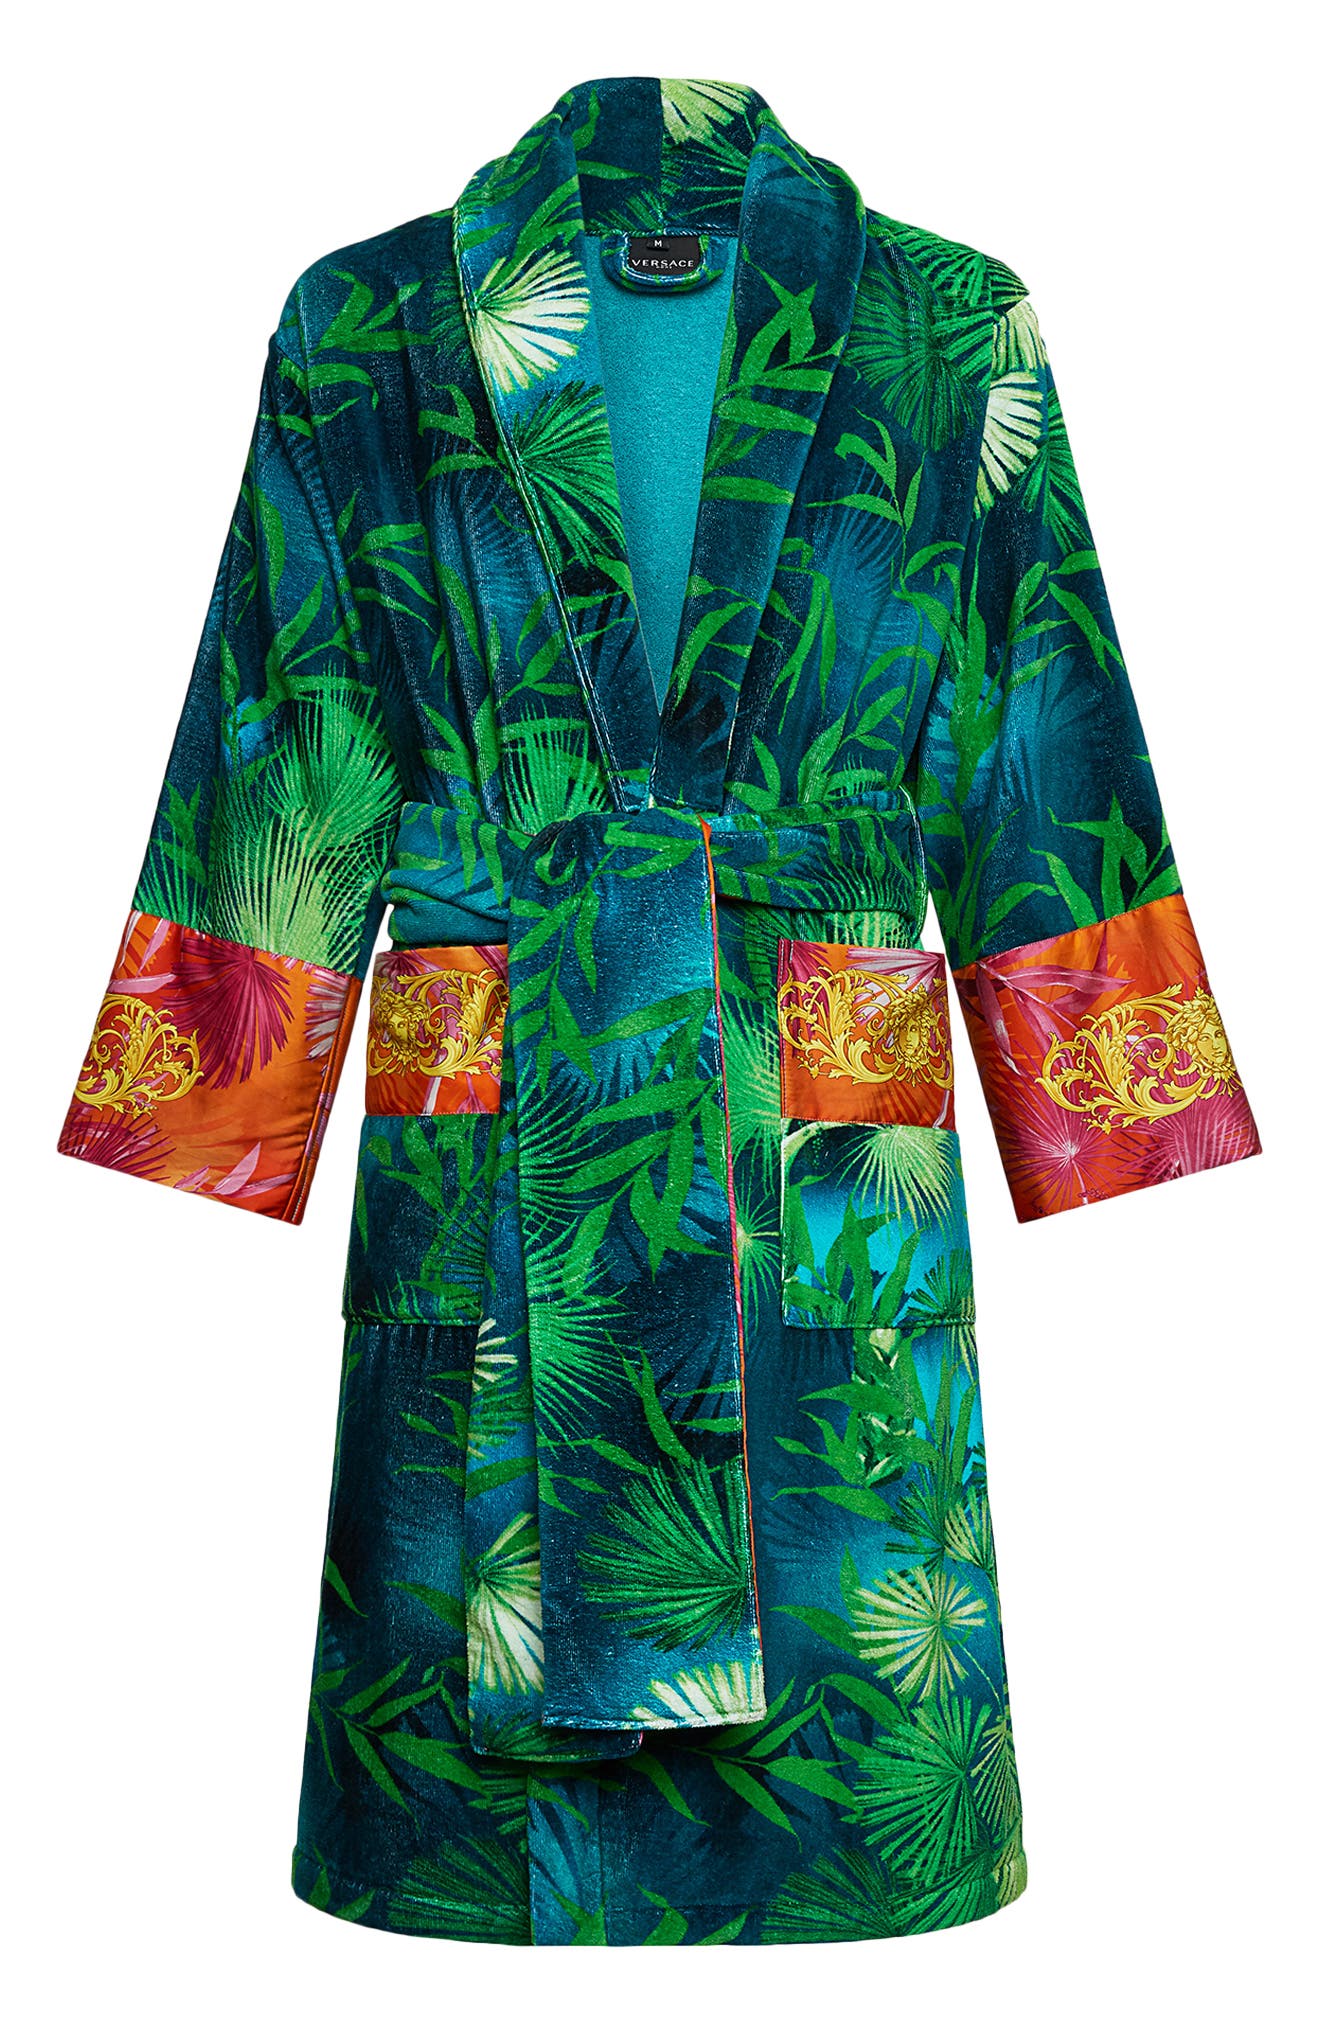 Womens Clothing Nightwear and sleepwear Robes robe dresses and bathrobes Versace Cotton Barocco Robe 